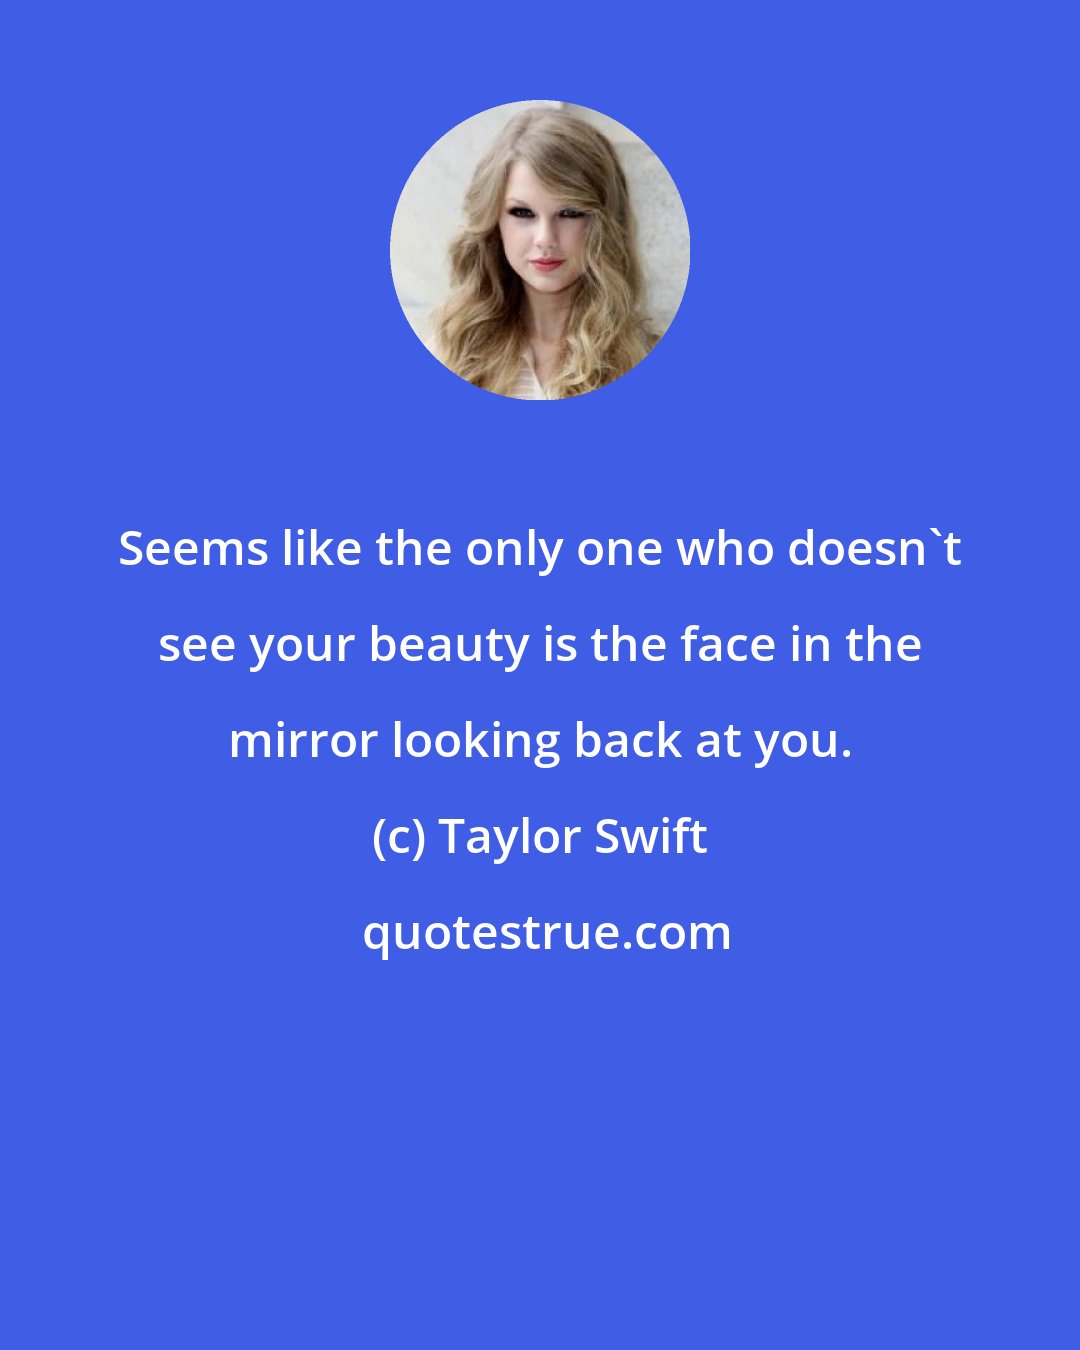 Taylor Swift: Seems like the only one who doesn't see your beauty is the face in the mirror looking back at you.